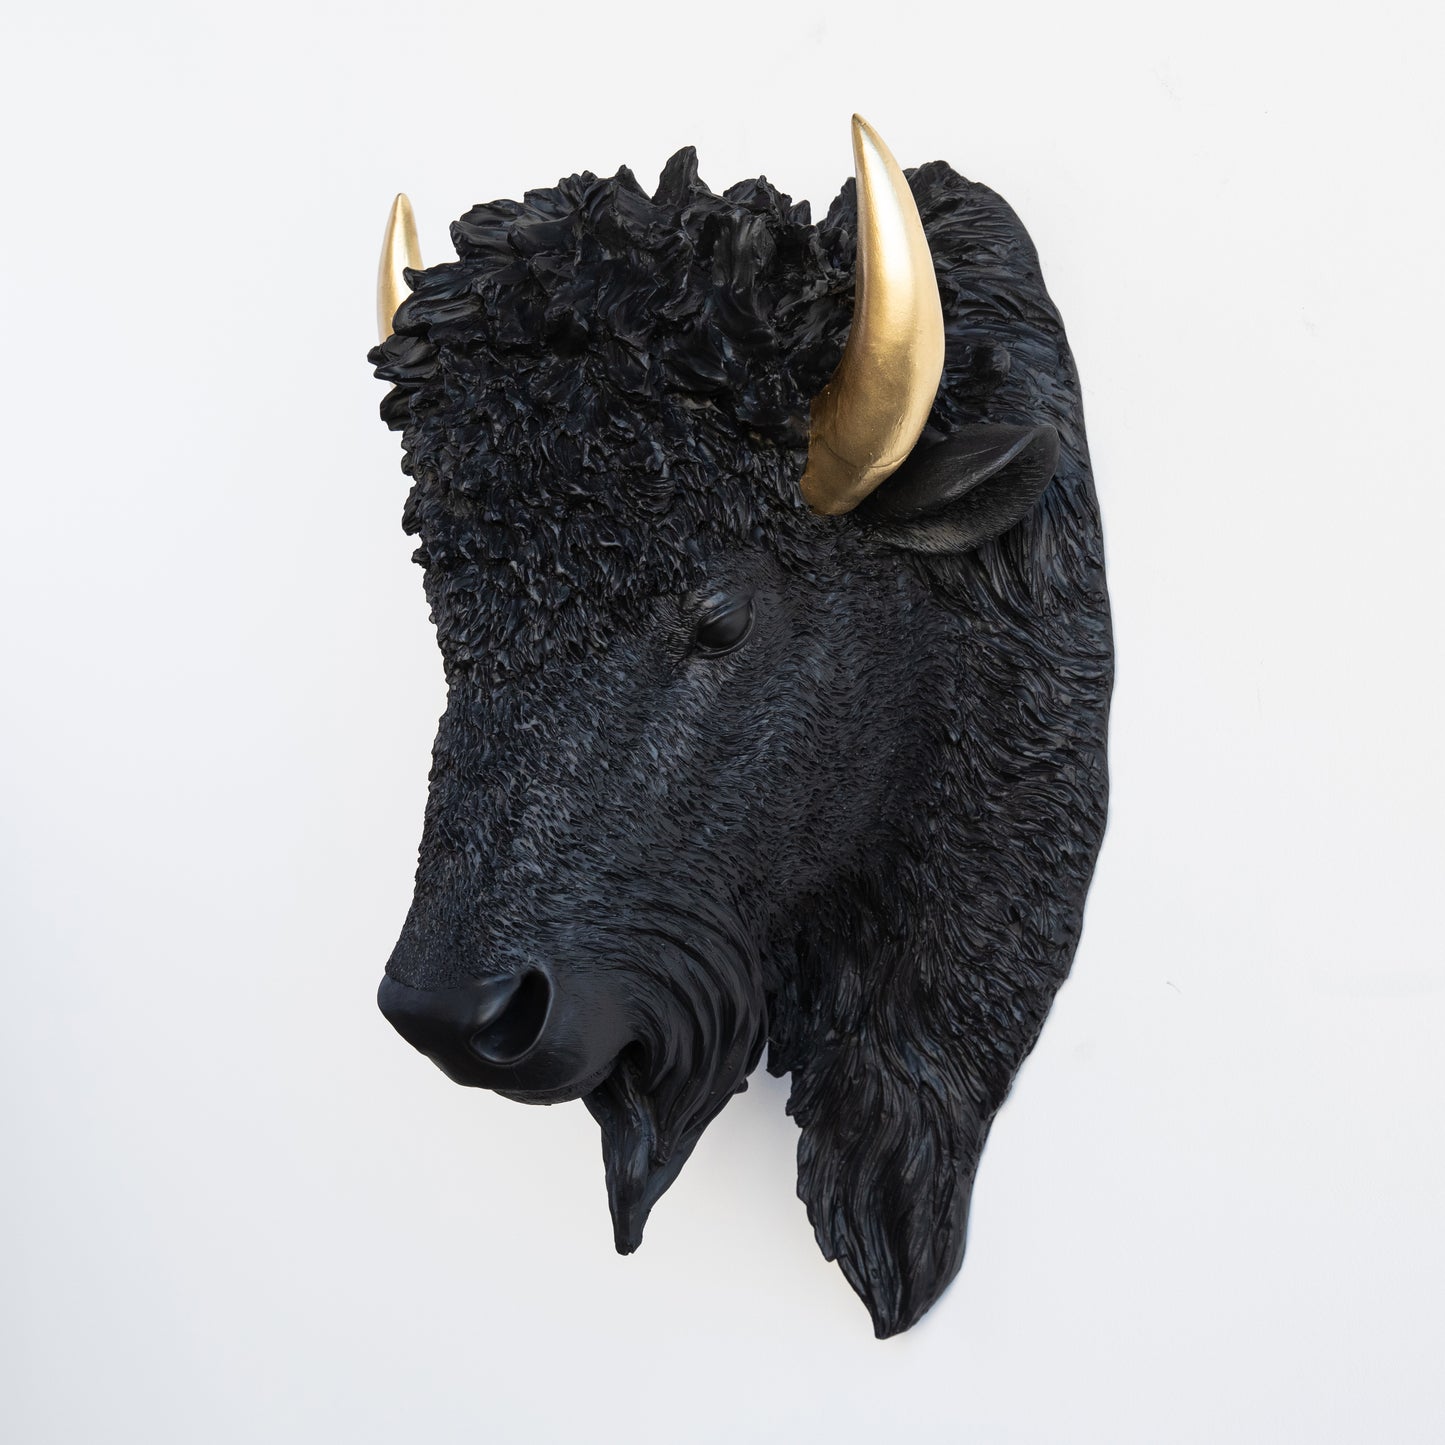 Faux Buffalo Bison Head Wall Mount // Black with Gold Horns